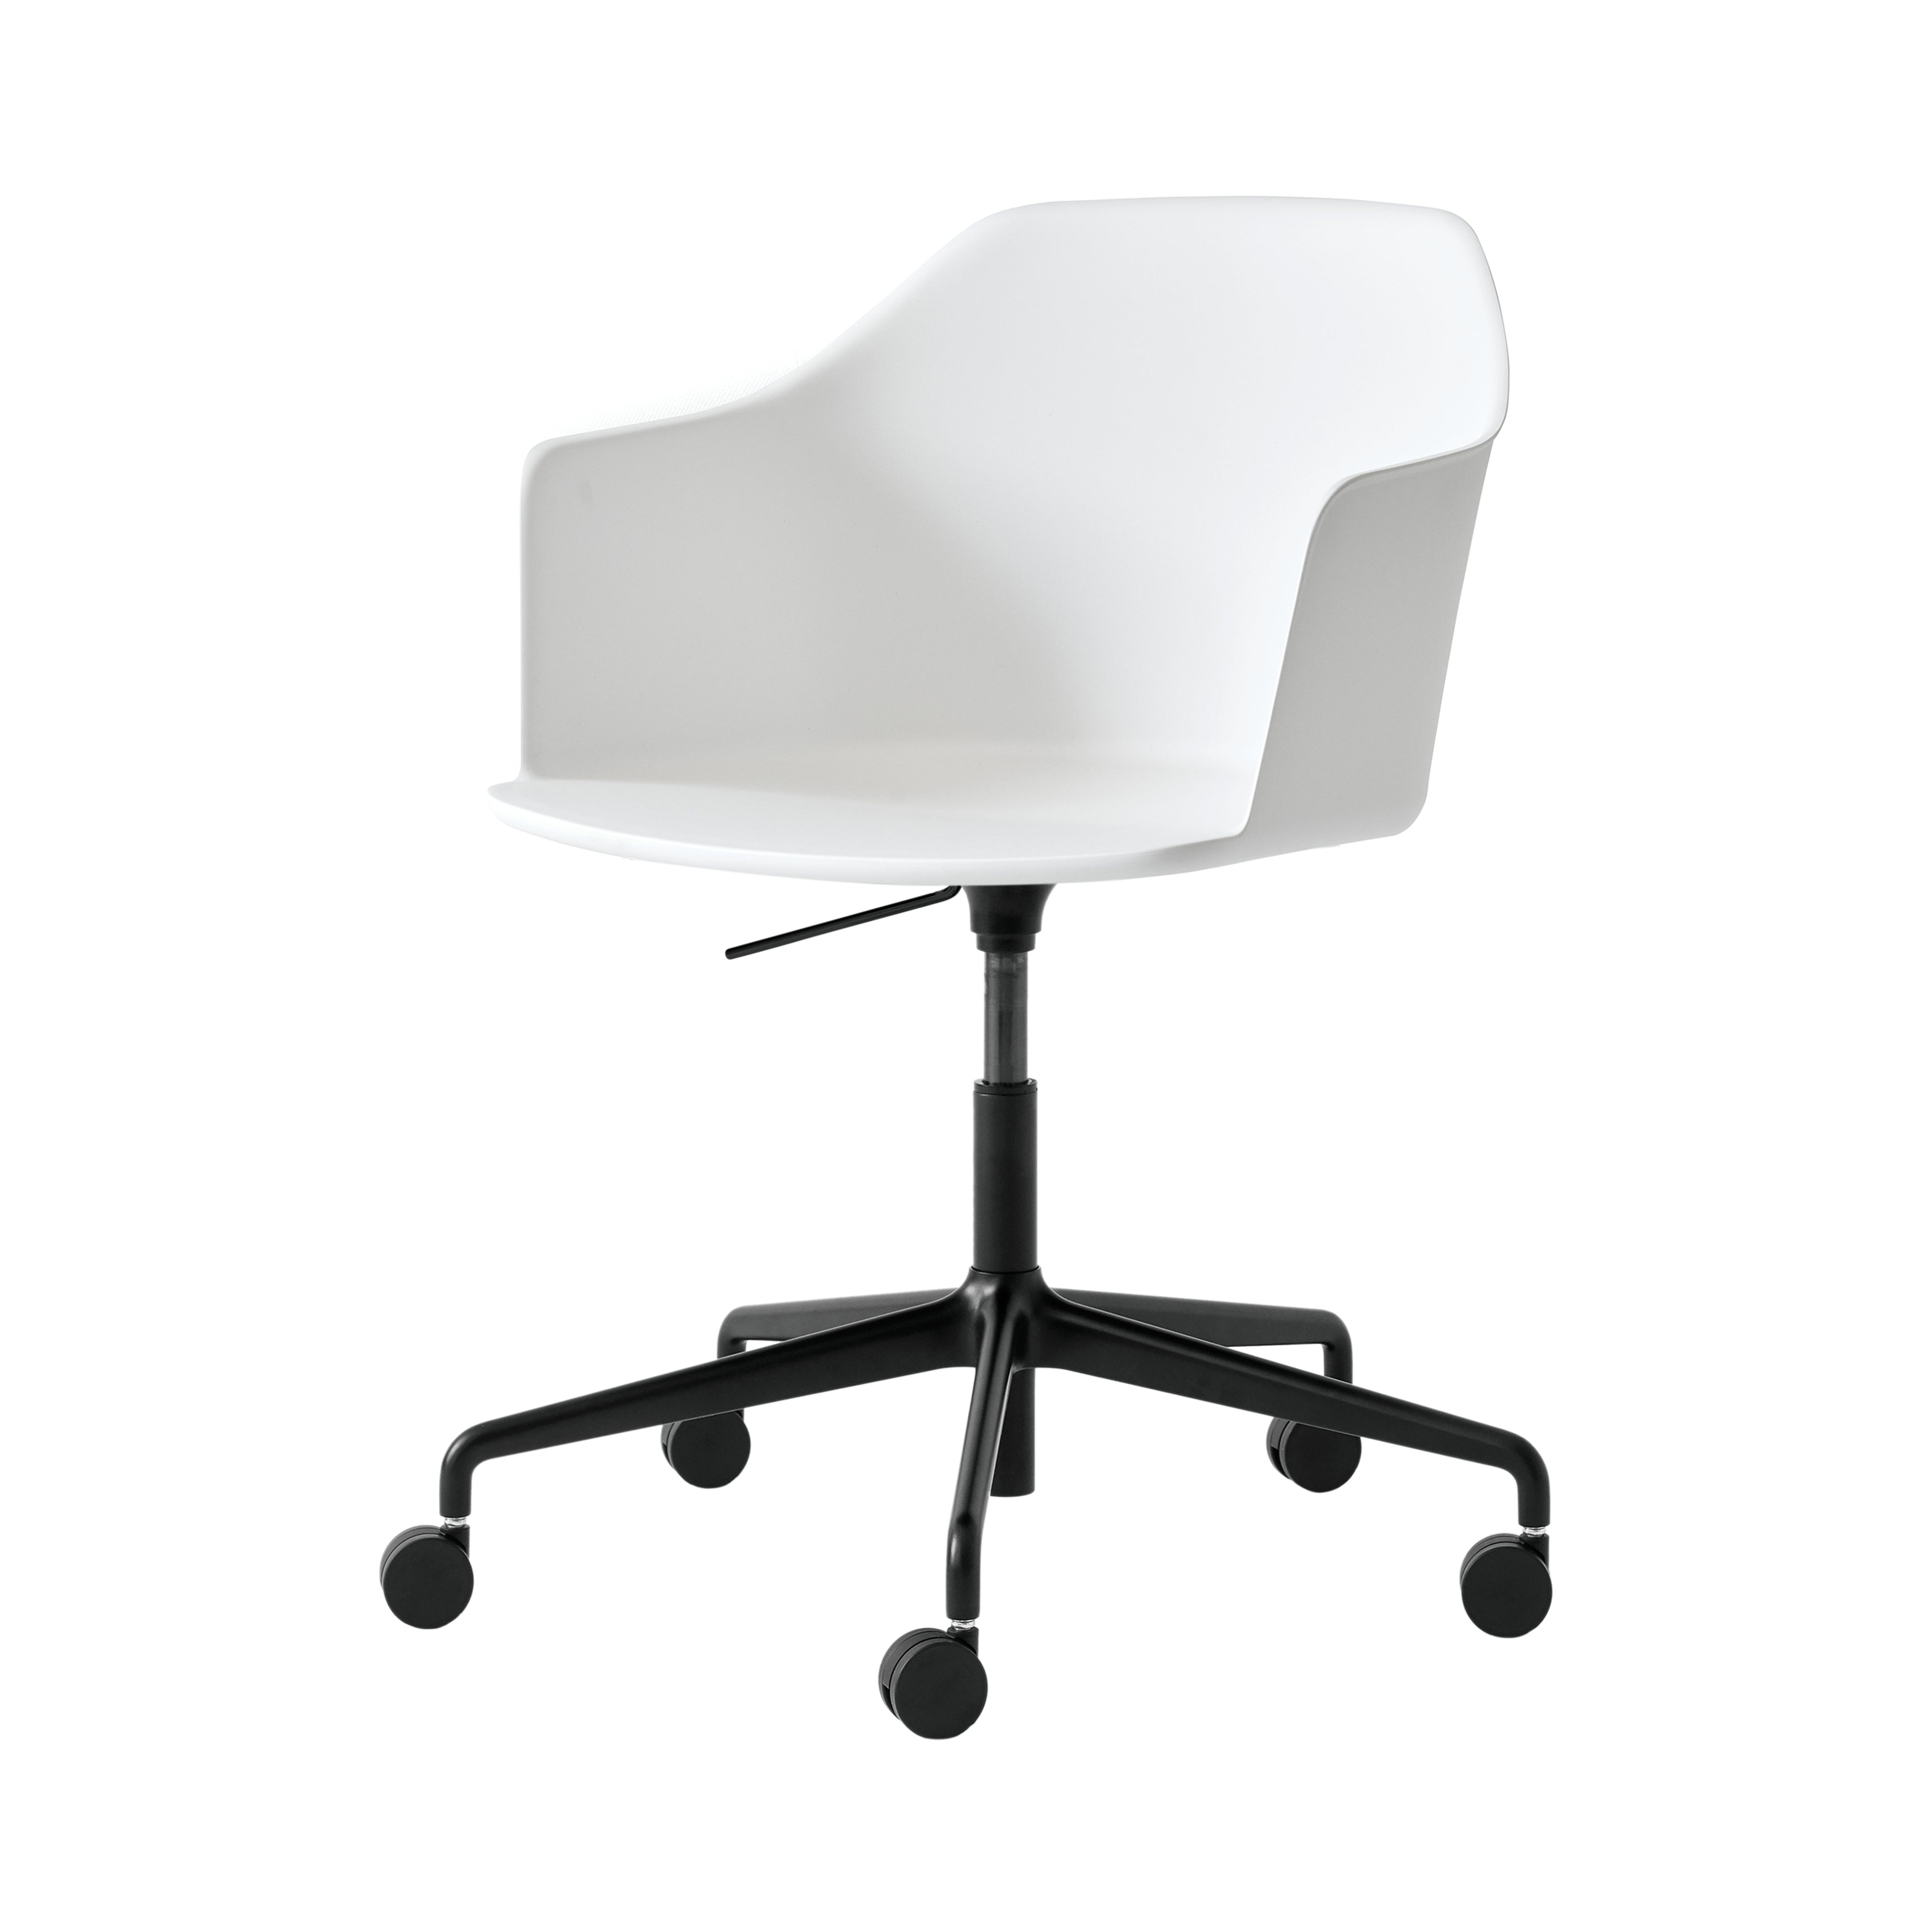 Rely Chair HW53: White + Black